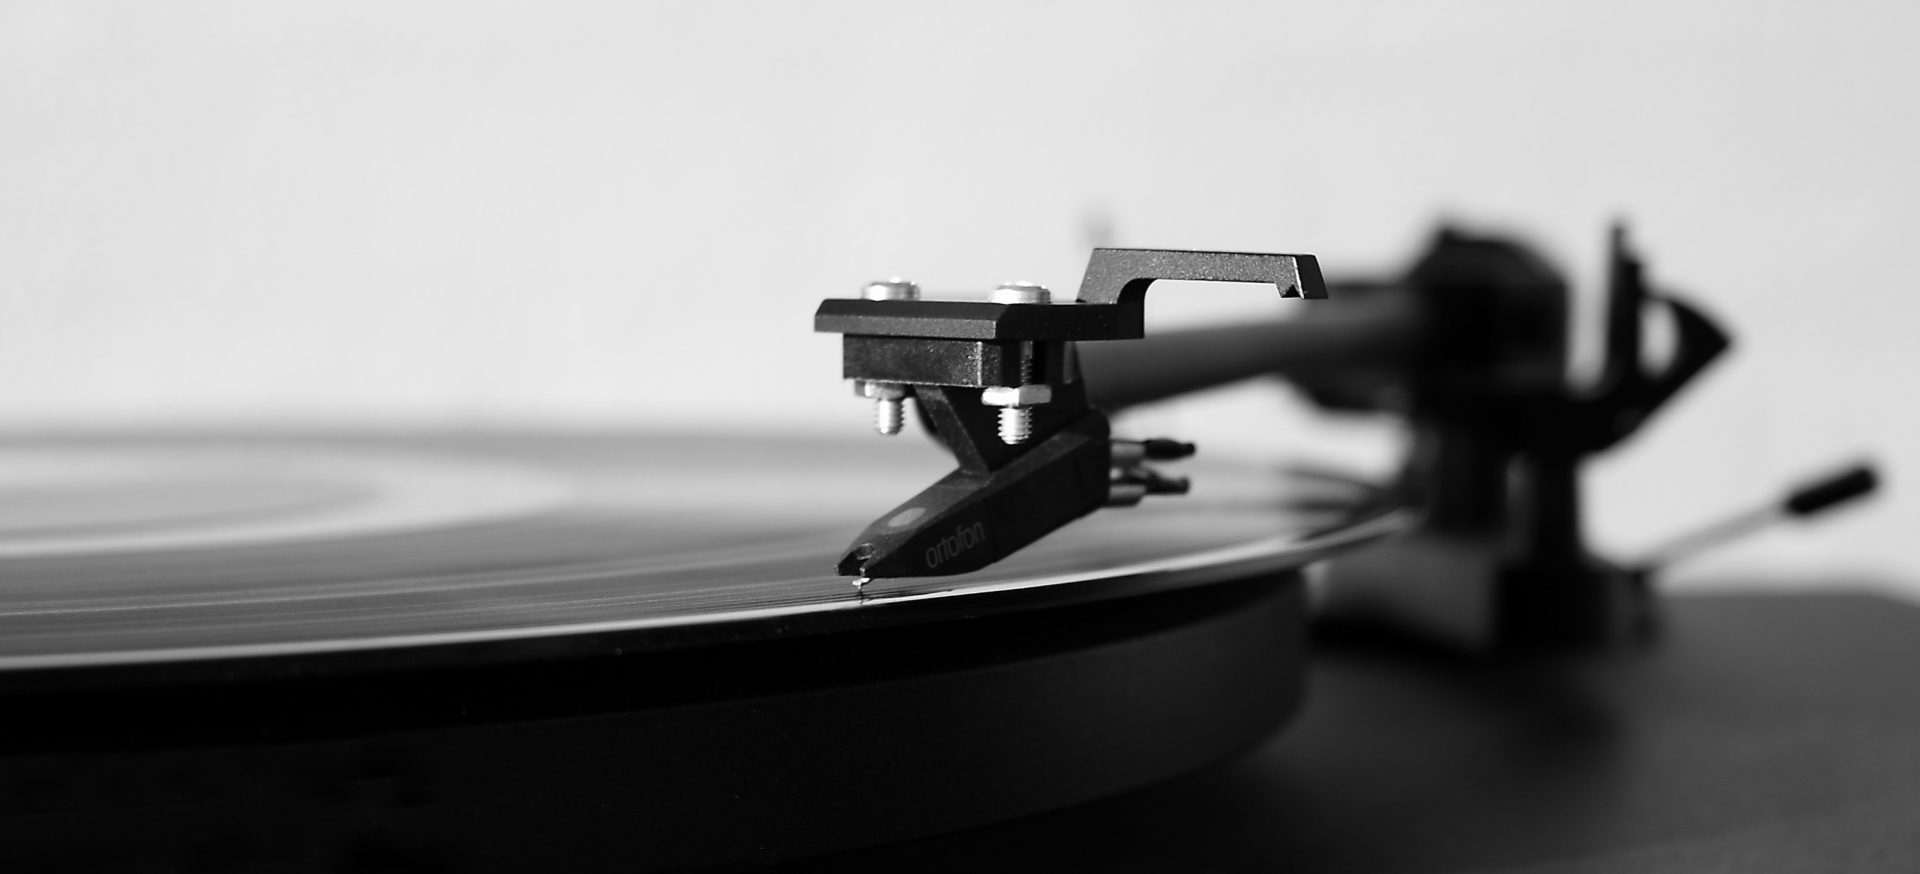 close up shot of a record player cartridge and stylus on a vinyl record